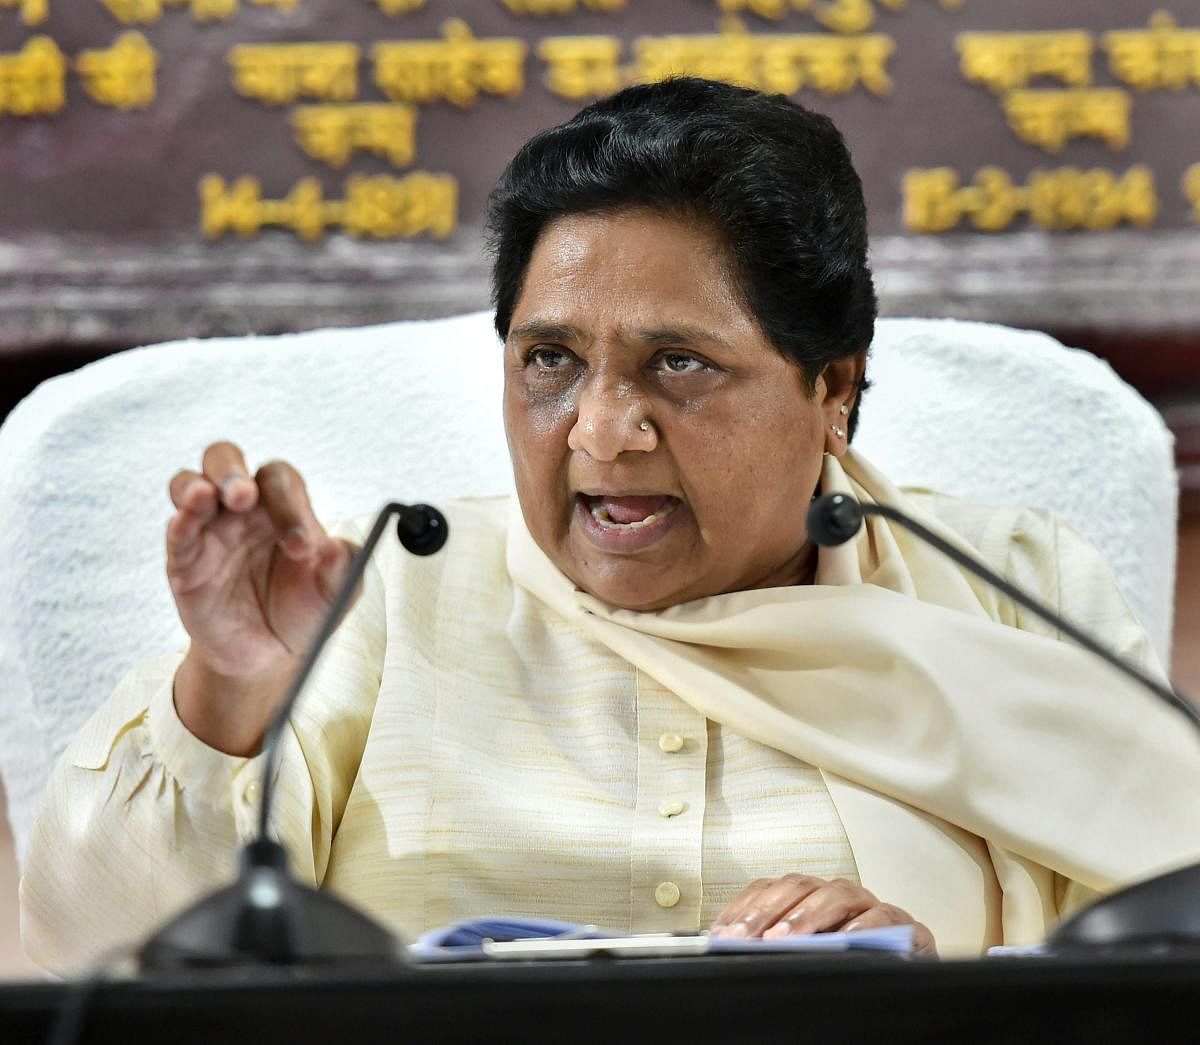 The BSP chief also said that instances of mob lynching in the name of cow protection were a "blot on democracy" and accused BJP governments in various states of being indifferent to the problem. (PTI Photo)